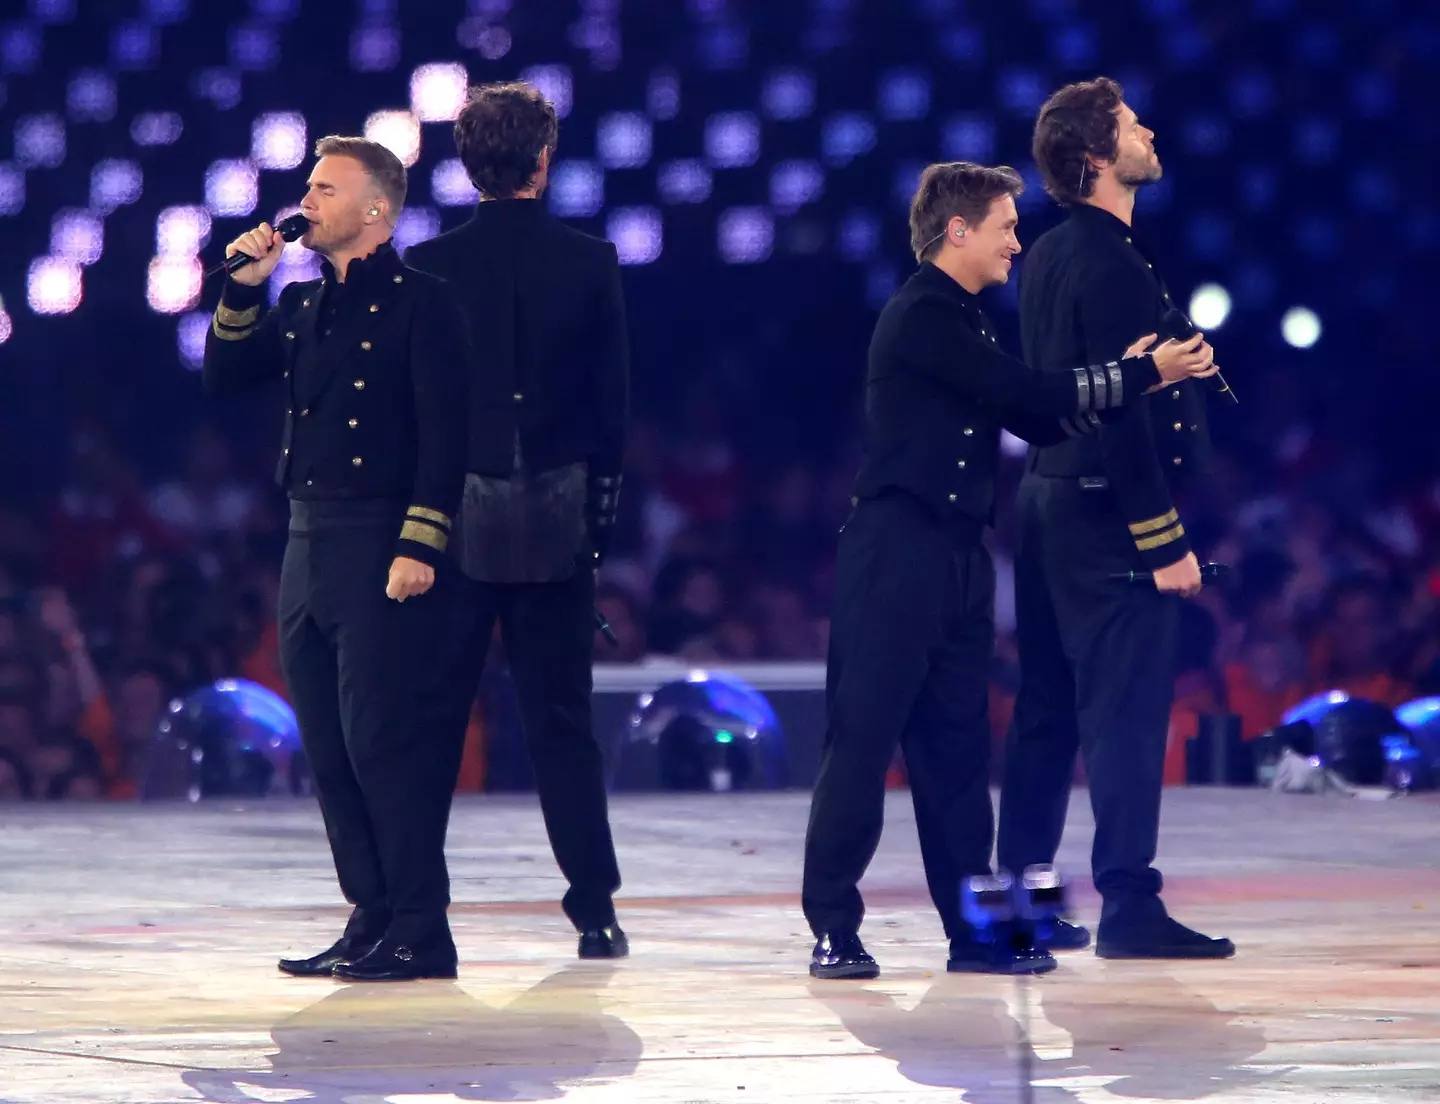 Gary was praised for joining his Take That bandmates after Poppy's stillbirth.